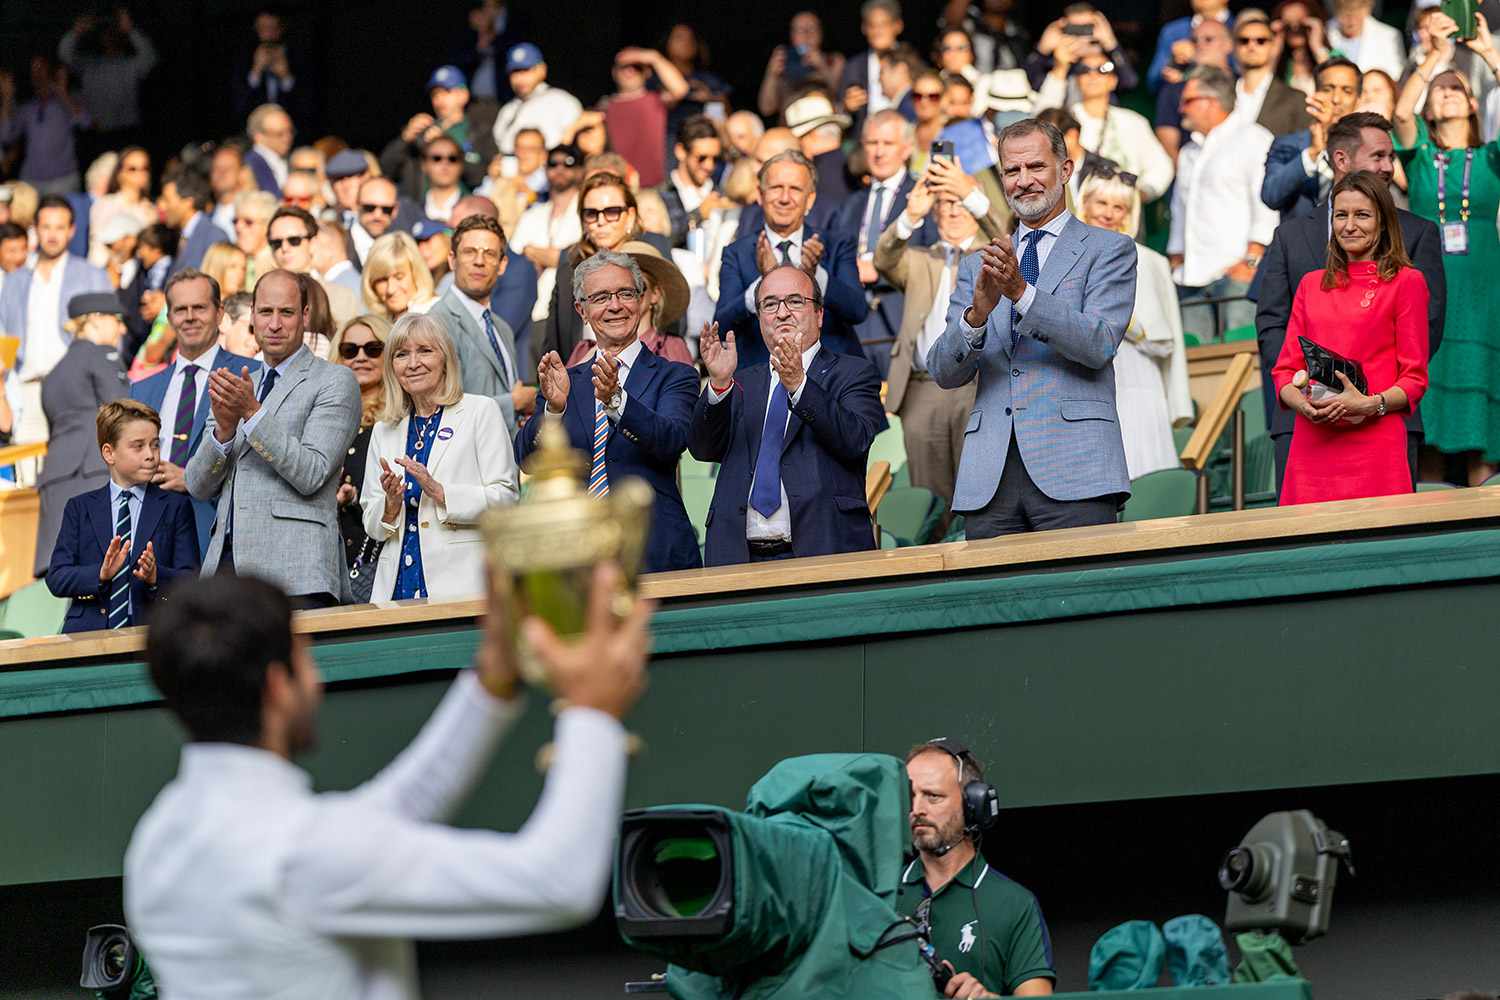 Carlos Alcaraz of Spain with the winners trophy is applauded by King Felipe of Spain after his victory against Novak Djokovic of Serbia in the Gentlemen's Singles Final match on Centre Court during the Wimbledon Lawn Tennis Championships at the All England Lawn Tennis and Croquet Club at Wimbledon on July 16, 2023